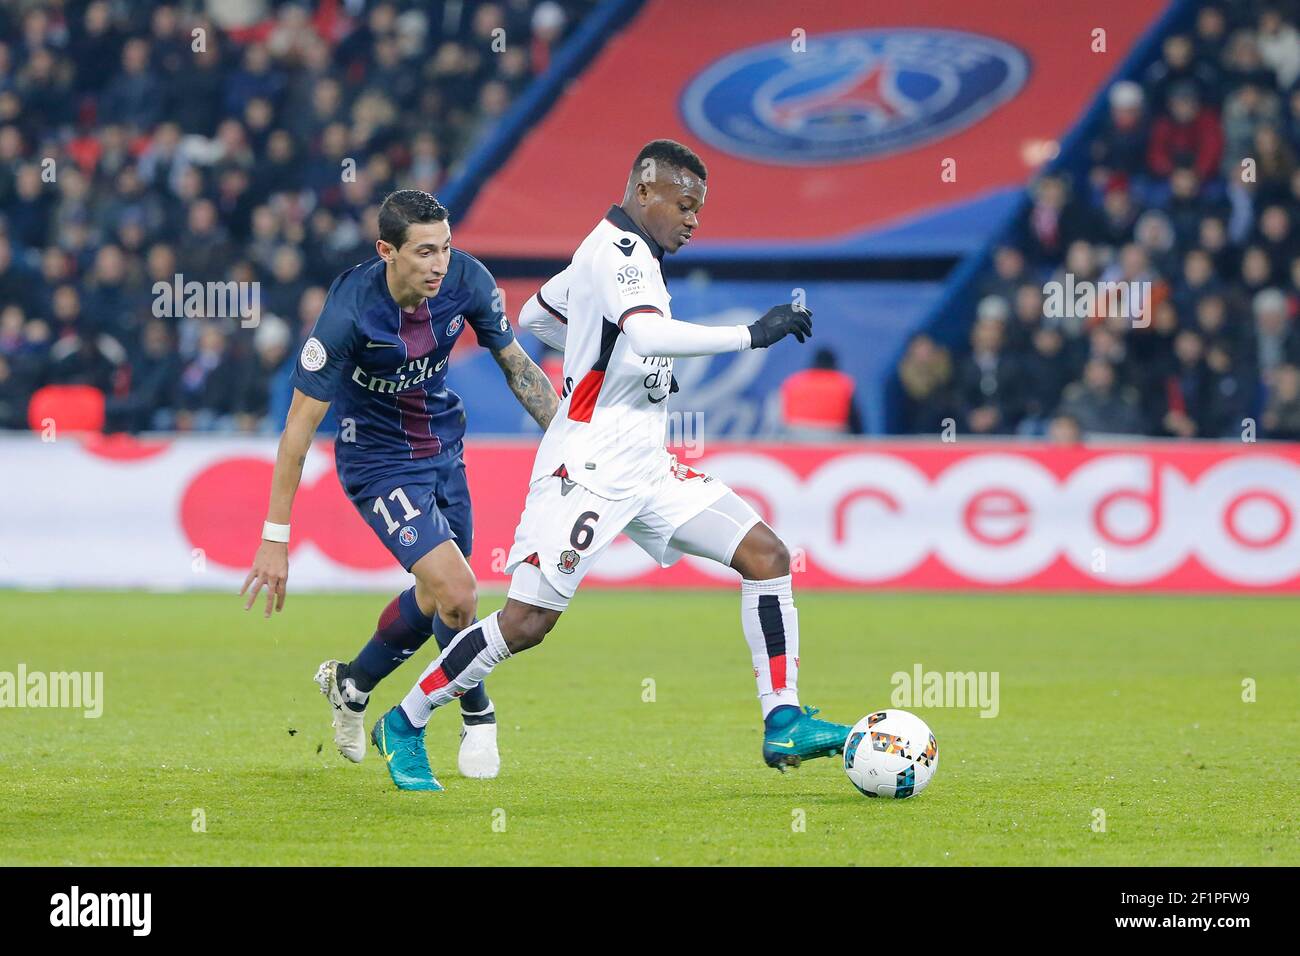 Angel Di Maria (psg) and Jean Michael Seri (Olympique Gymnaste Club Nice  Cote d Azur - OGC Nice) during the French Championship Ligue 1 football  match between Paris Saint-Germain and OGC Nice